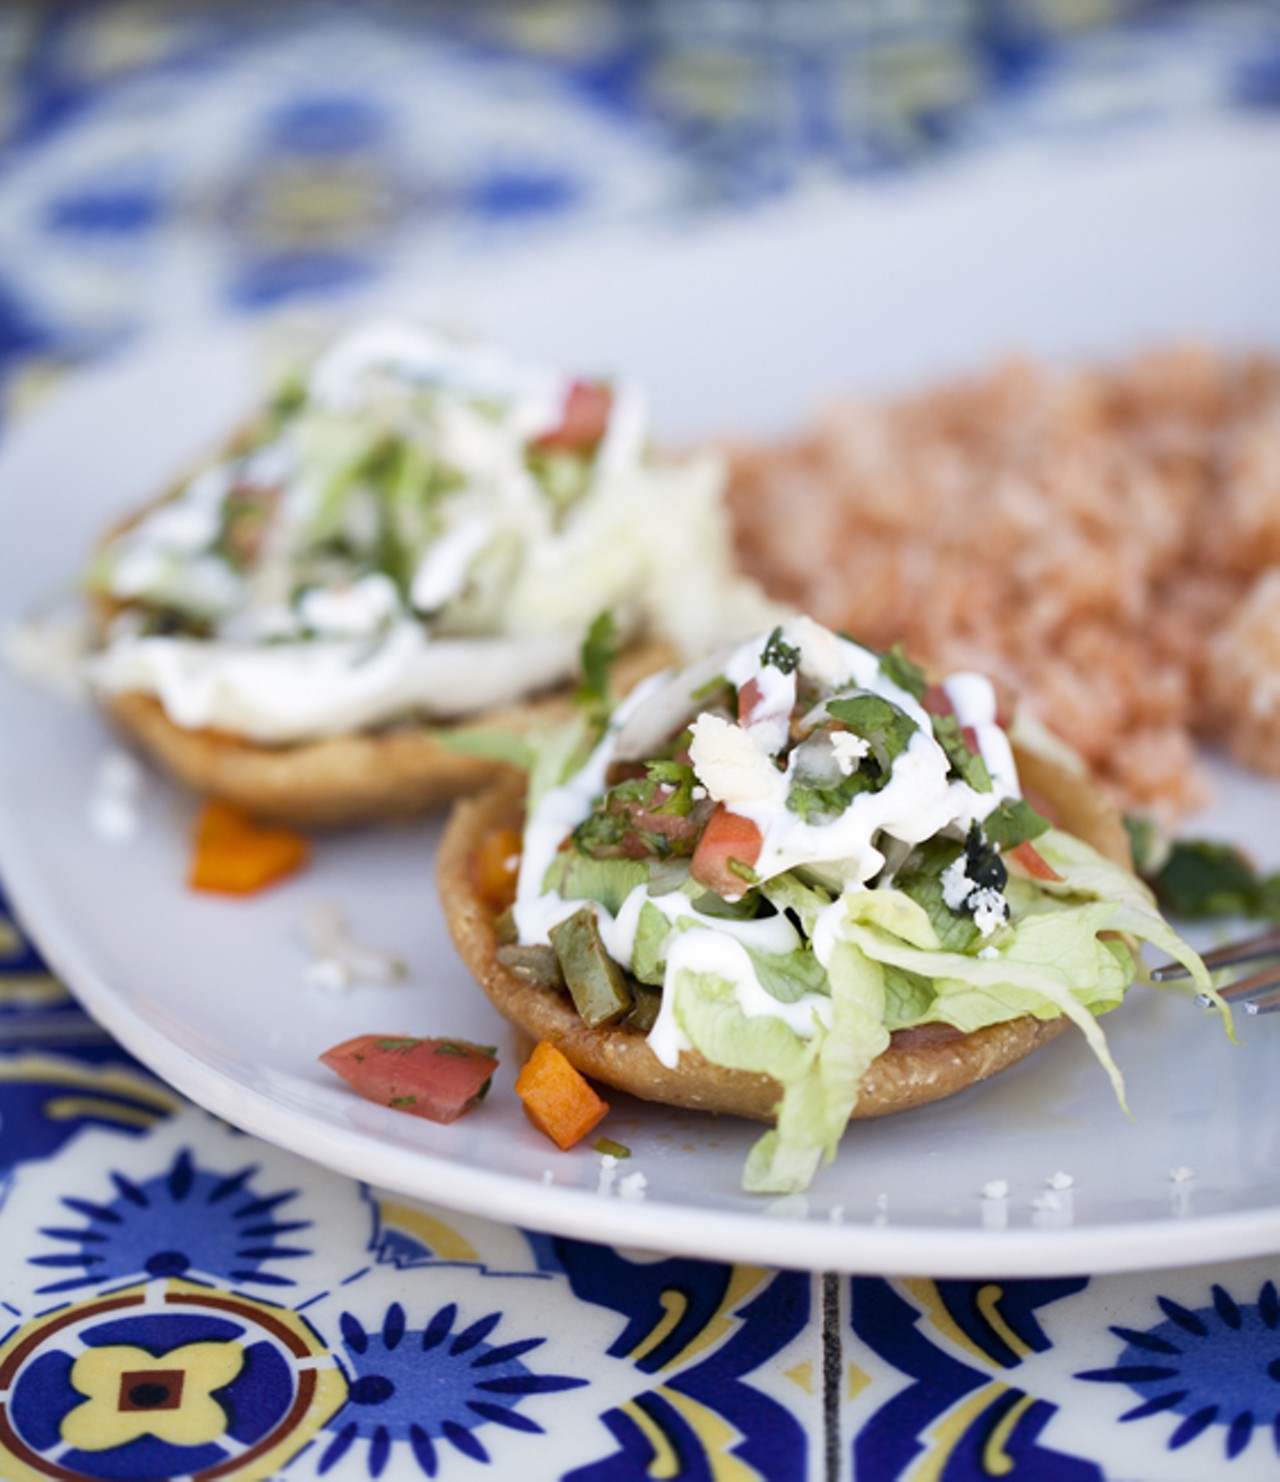 Sopes - deep fried handmade corn tortilla shells topped with steamed cactus, sauteed poblano chiles, lettuce, fresco cheese and sour cream.